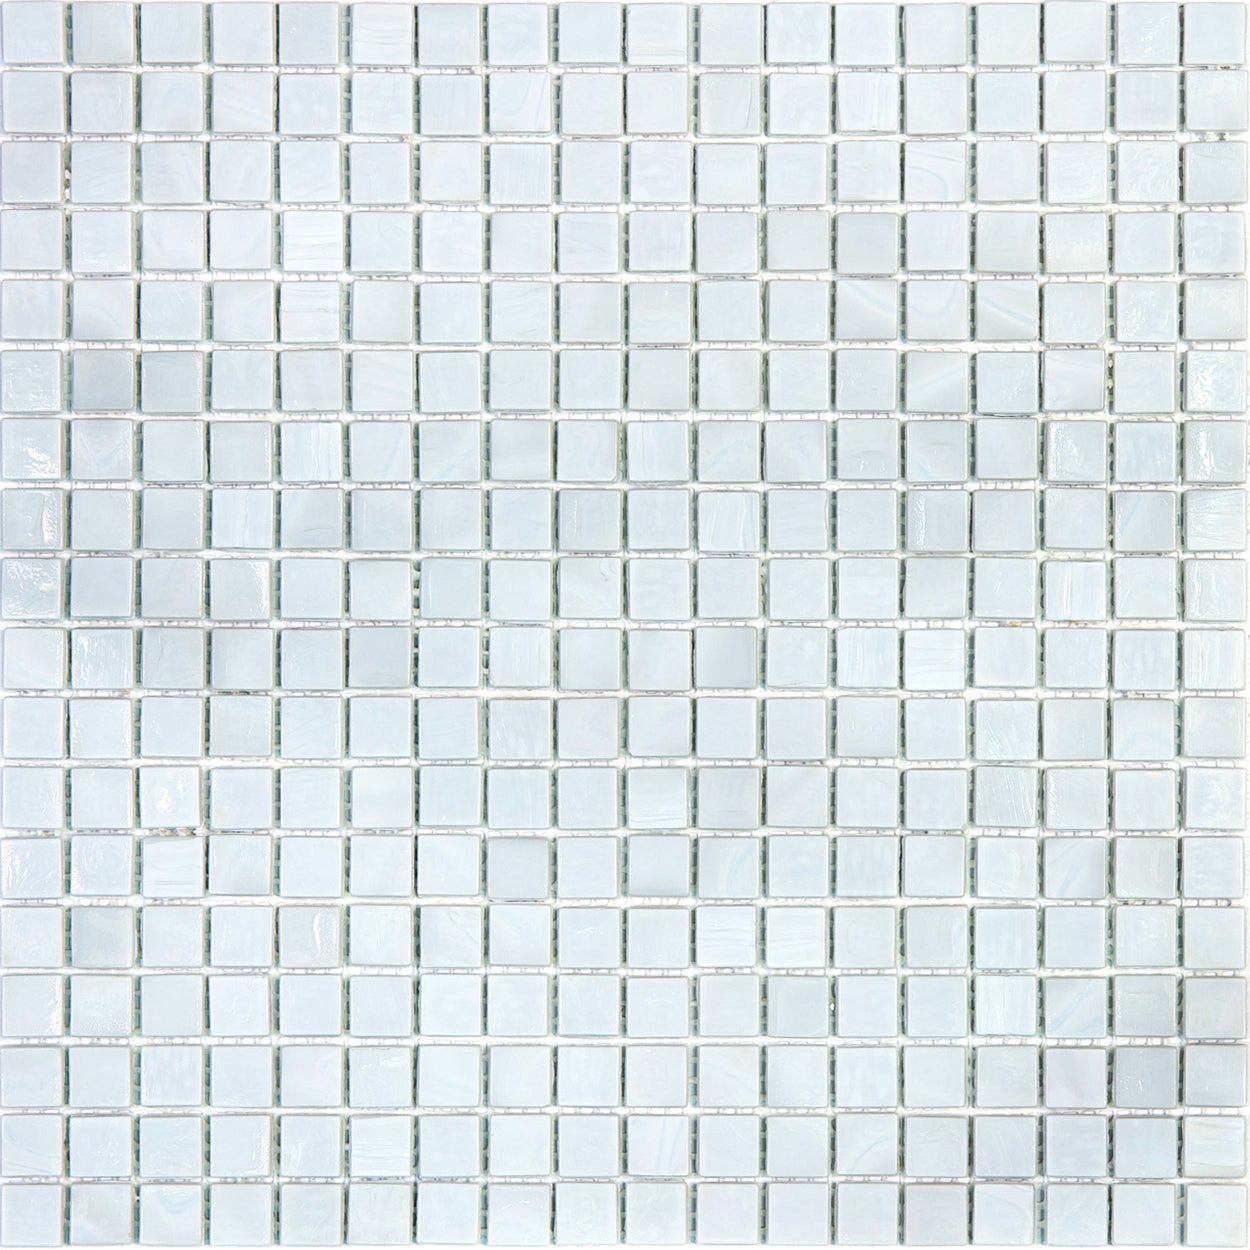 mir alma solid colors 0_6 inch nibble nc0208 wall and floor mosaic distributed by surface group natural materials